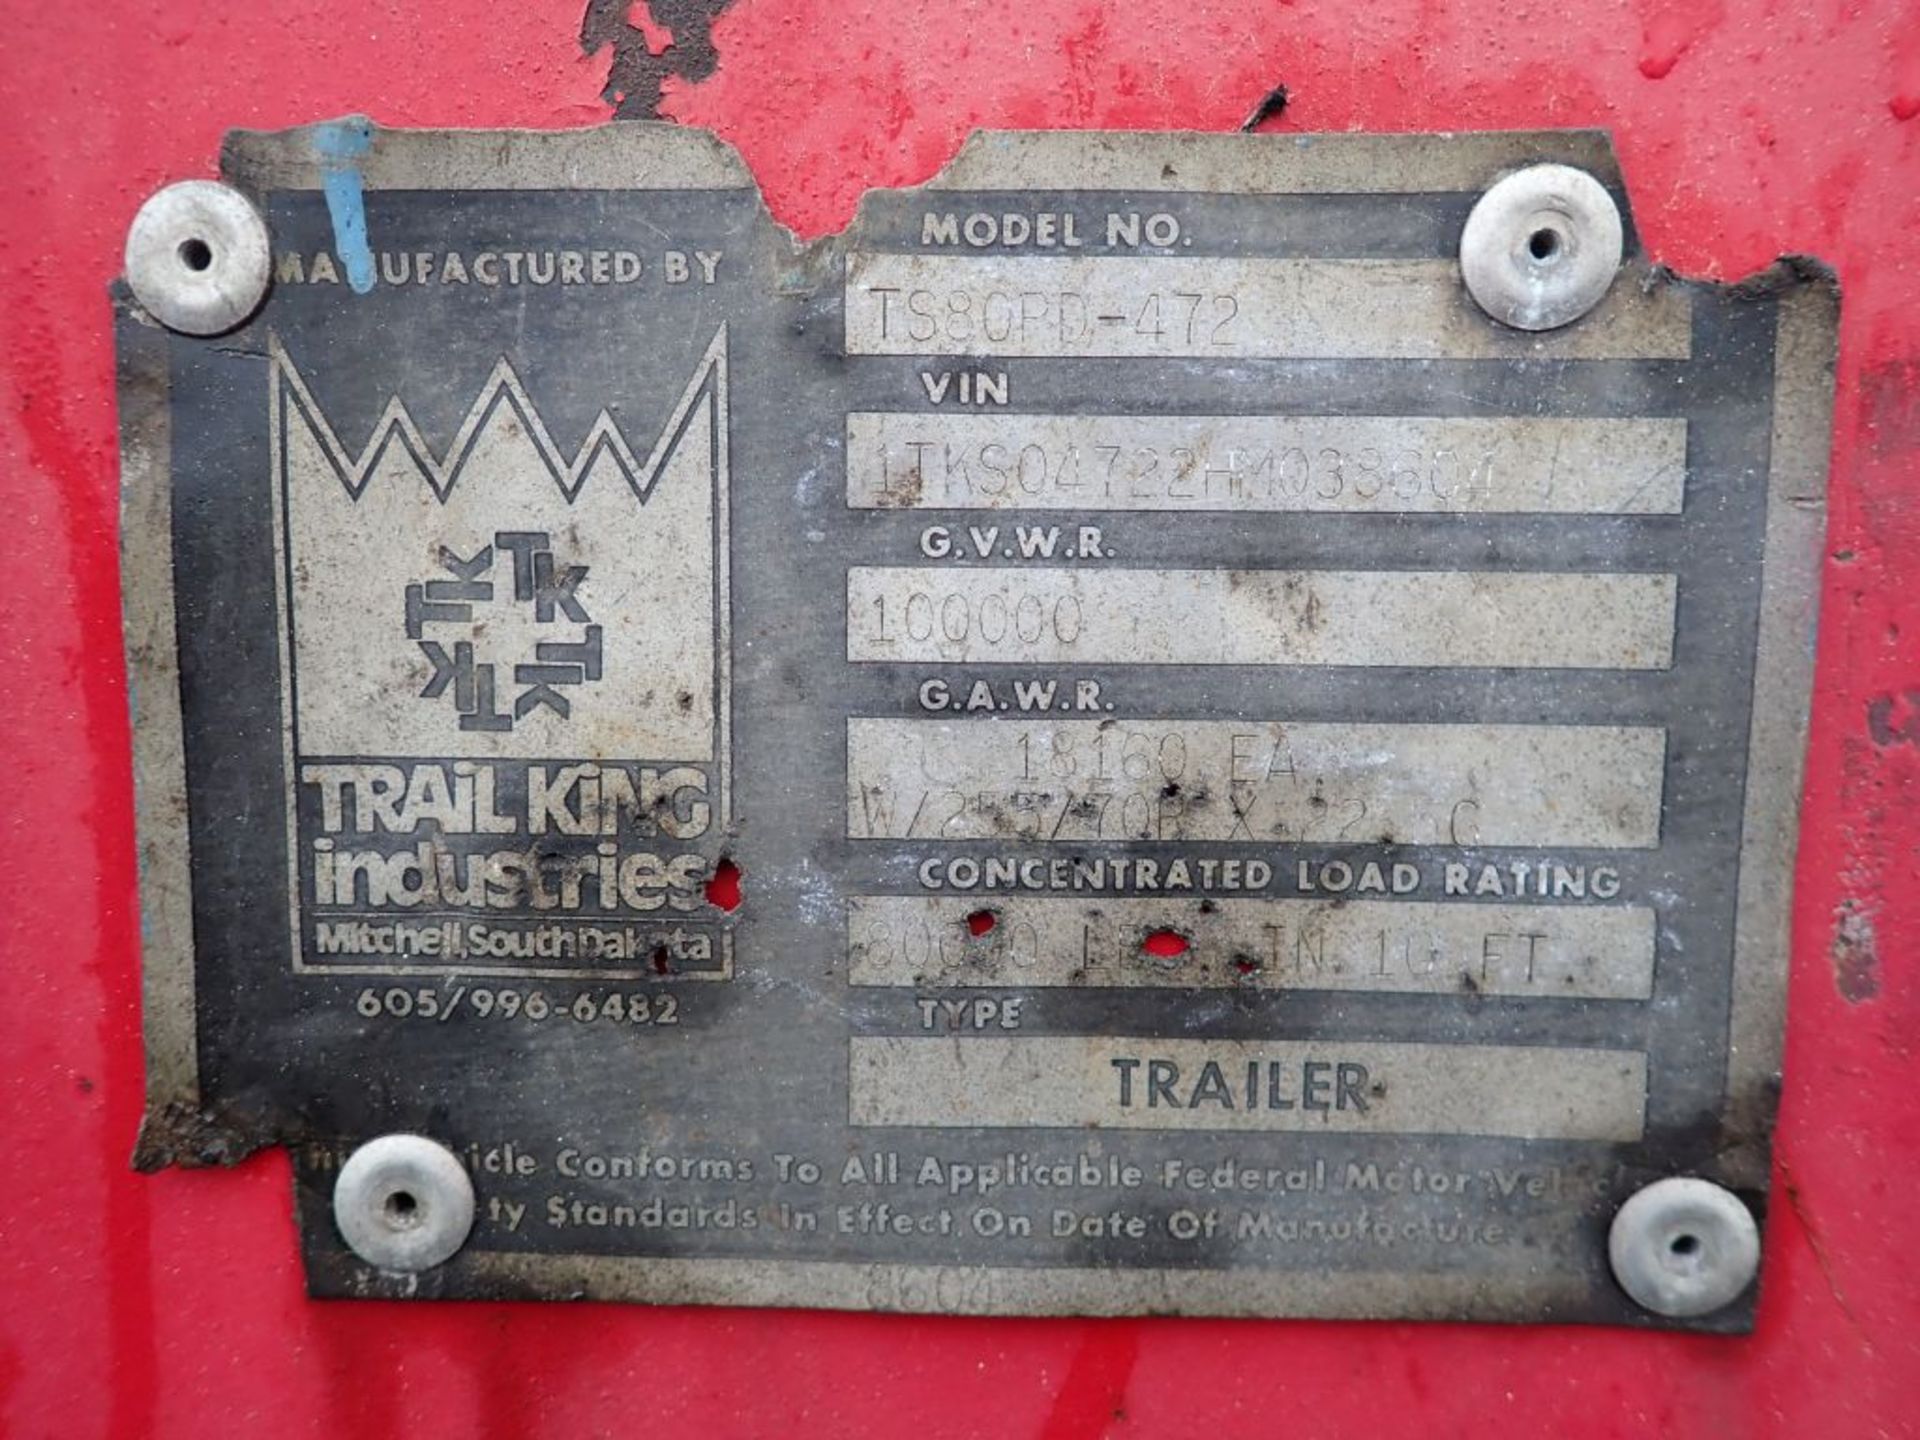 1987 Trailking 47' Low Boy Trailer - Located in Spartanburg, SC - Image 11 of 11